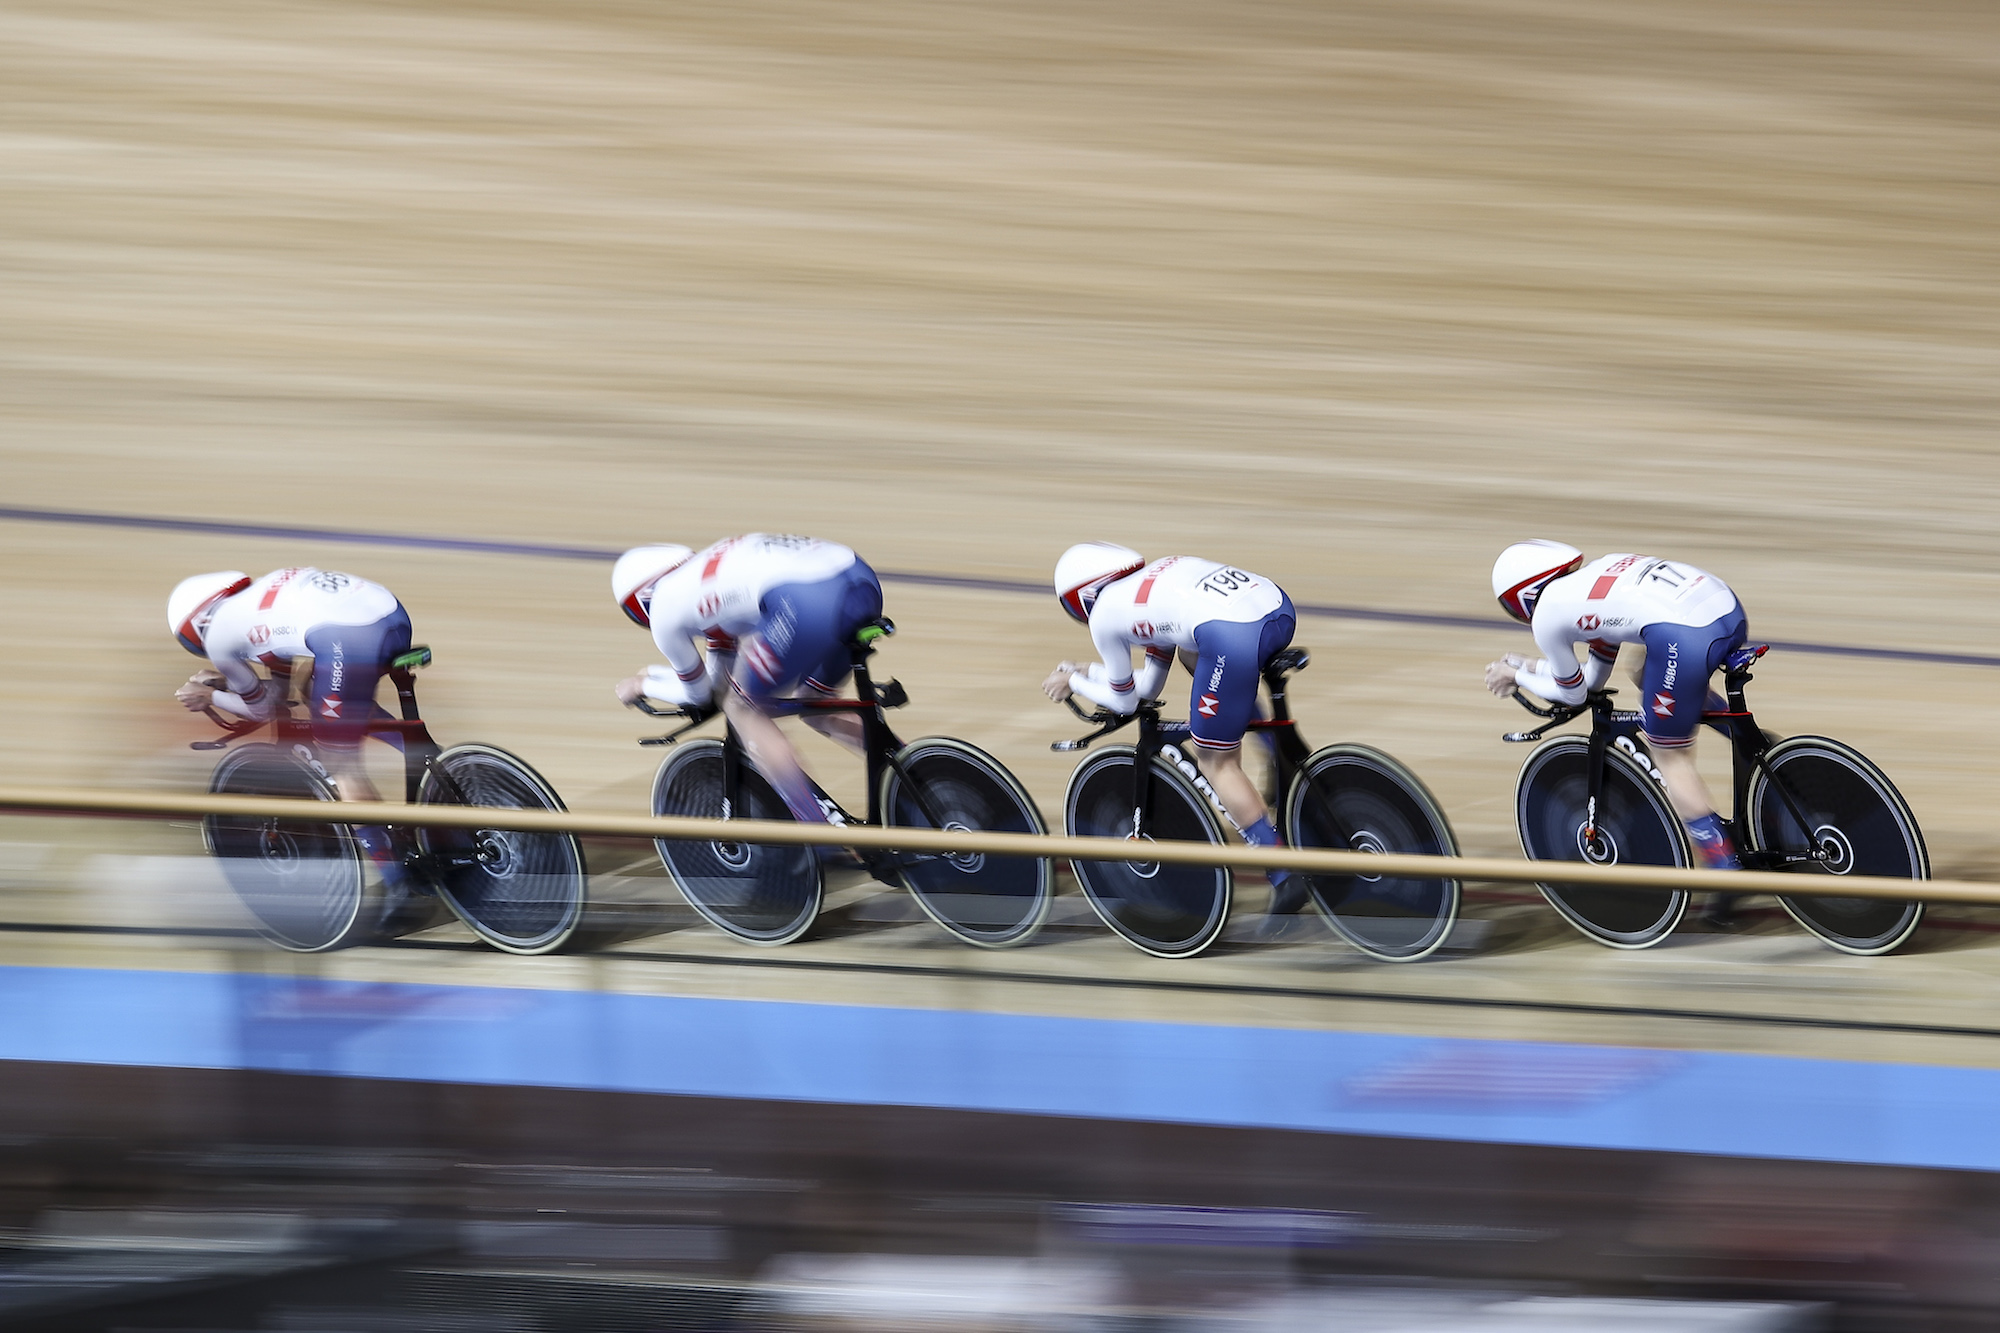 British Cycling to receive £35 million for Paris 2024 Olympics